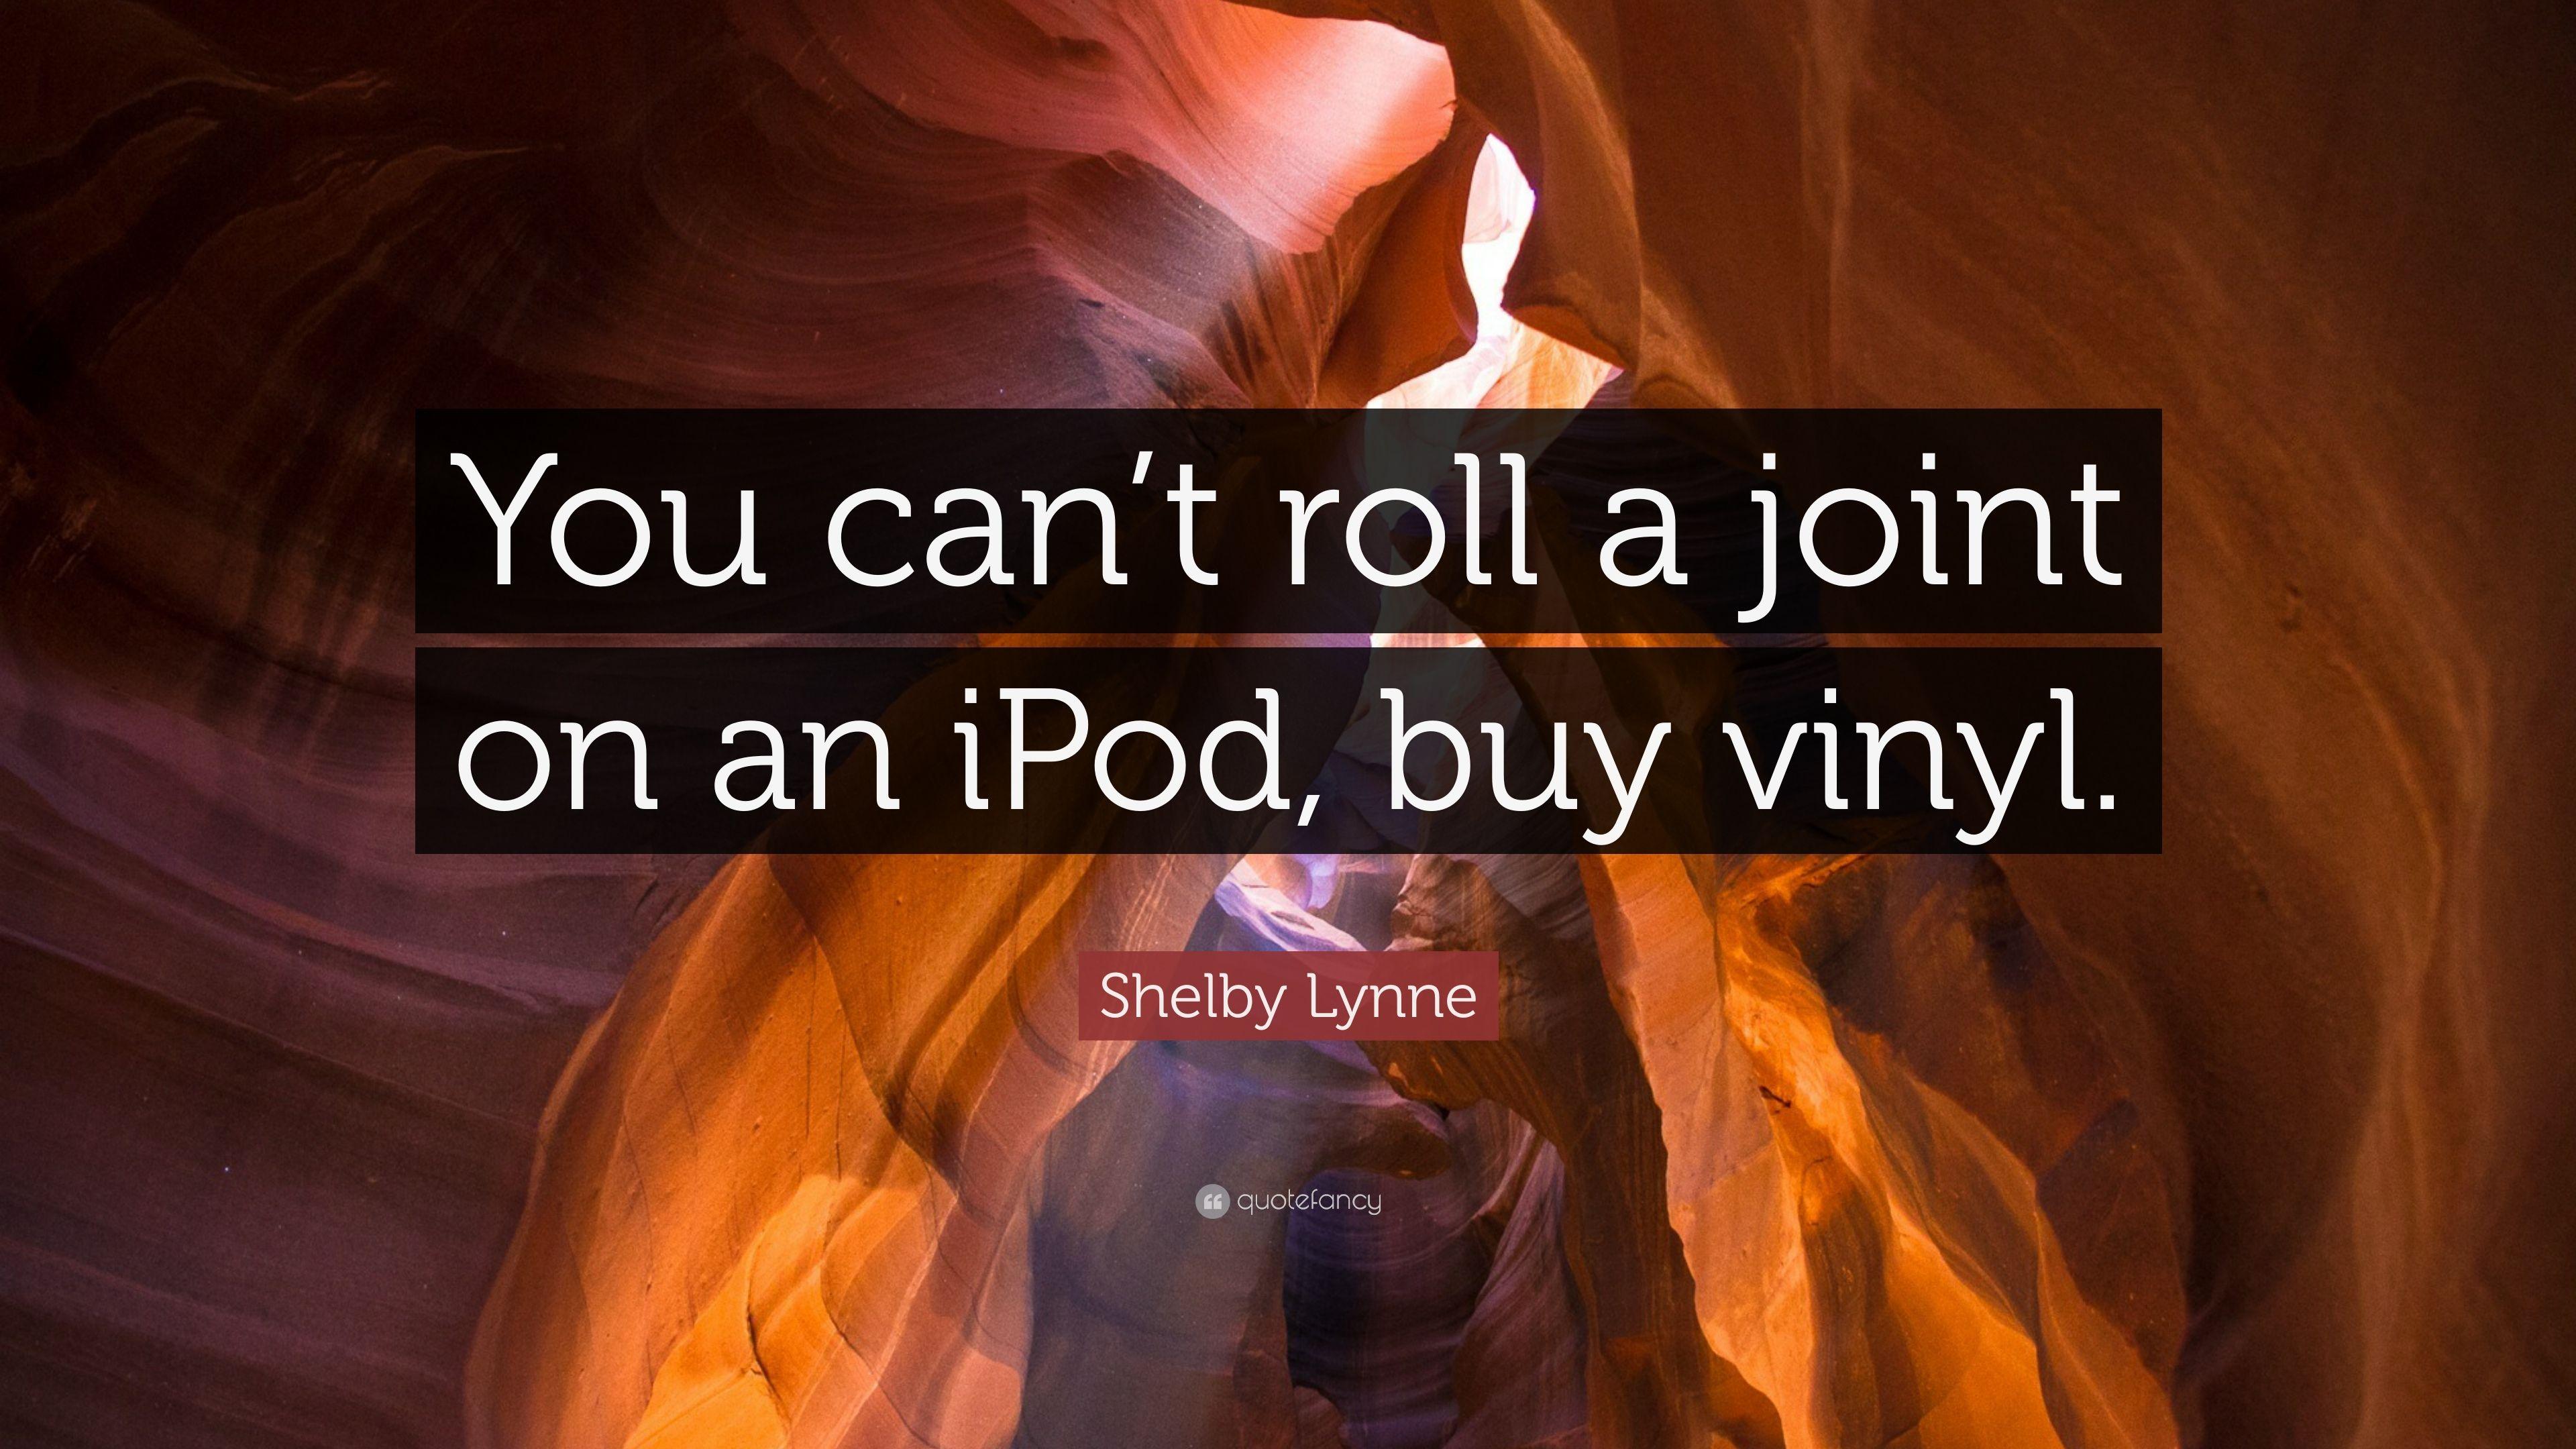 Shelby Lynne Quote: “You can't roll a joint on an iPod, buy vinyl